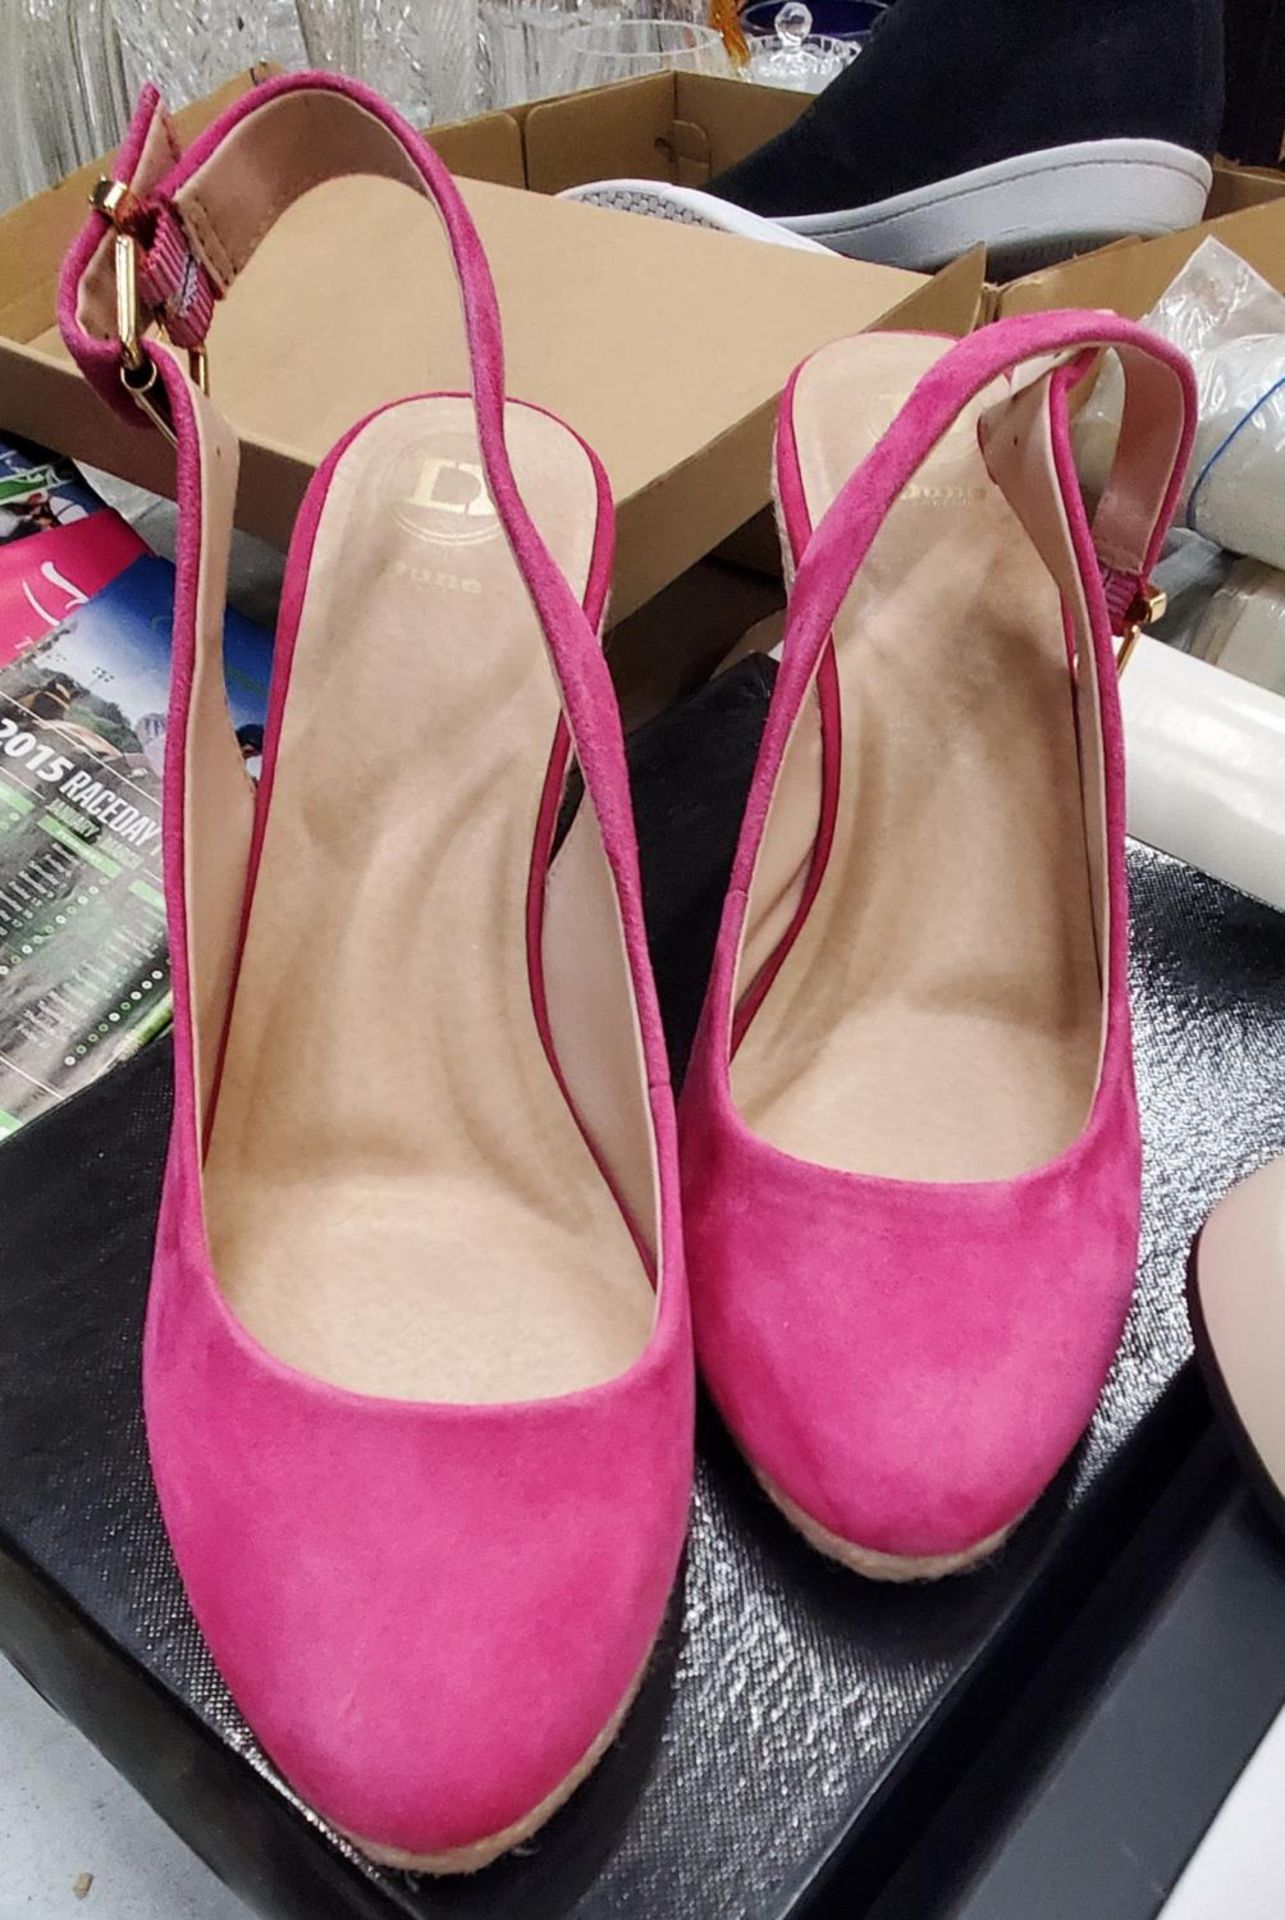 A PAIR OF 'UTERQUE' SIZE 37 TRAINERS AND A PAIR OF DUNE SIZE 7 PINK WEDGE SHOES - BOTH AS NEW IN - Image 3 of 3